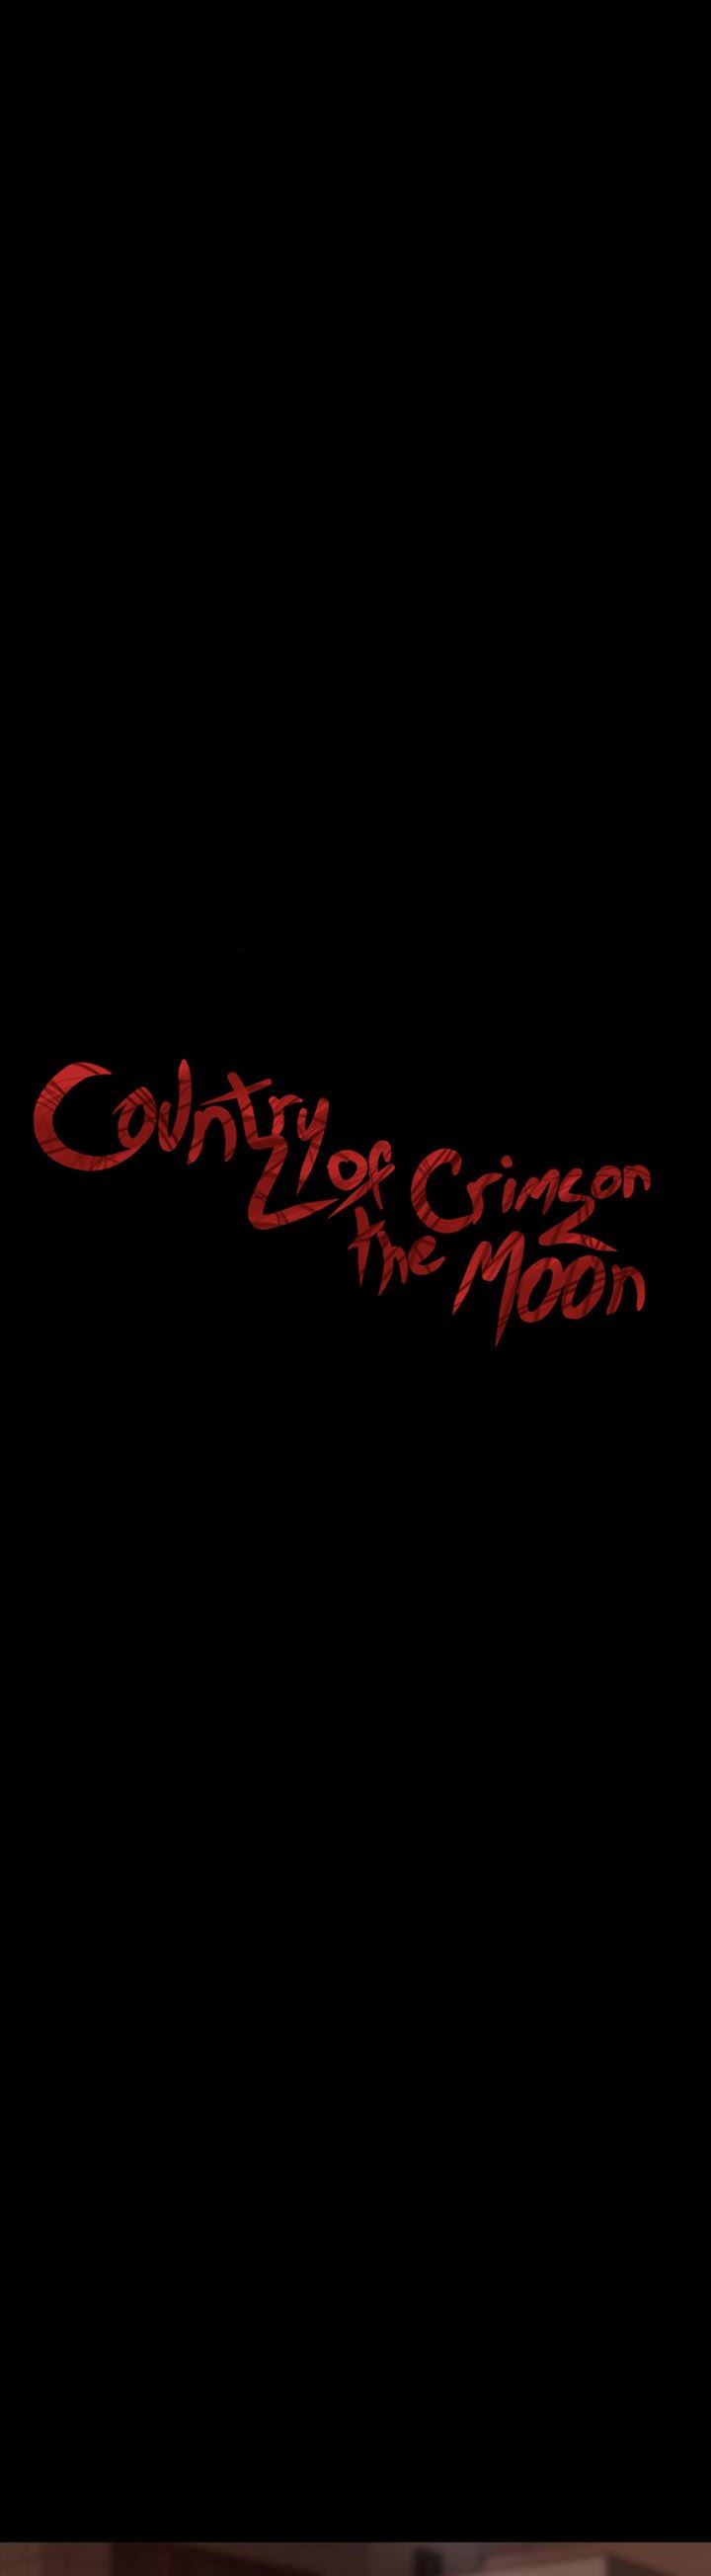 Country of The Crimson Moon Chapter 06.1